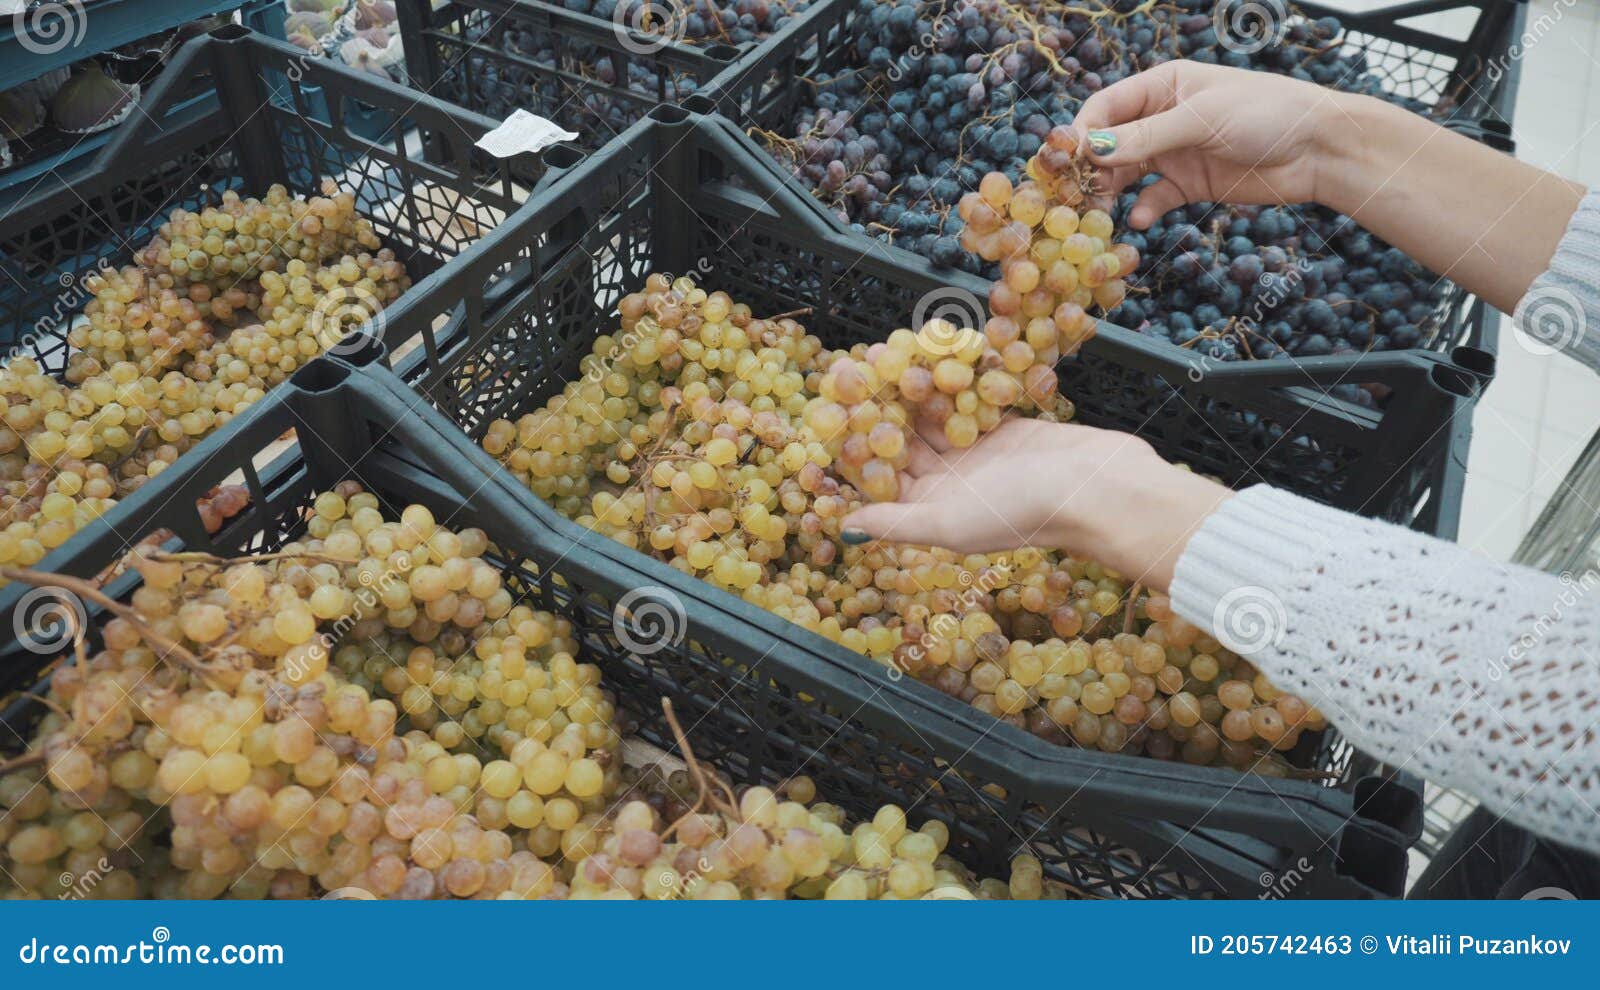 young woman chooses white grapes at the market. girl`s hands close-up.